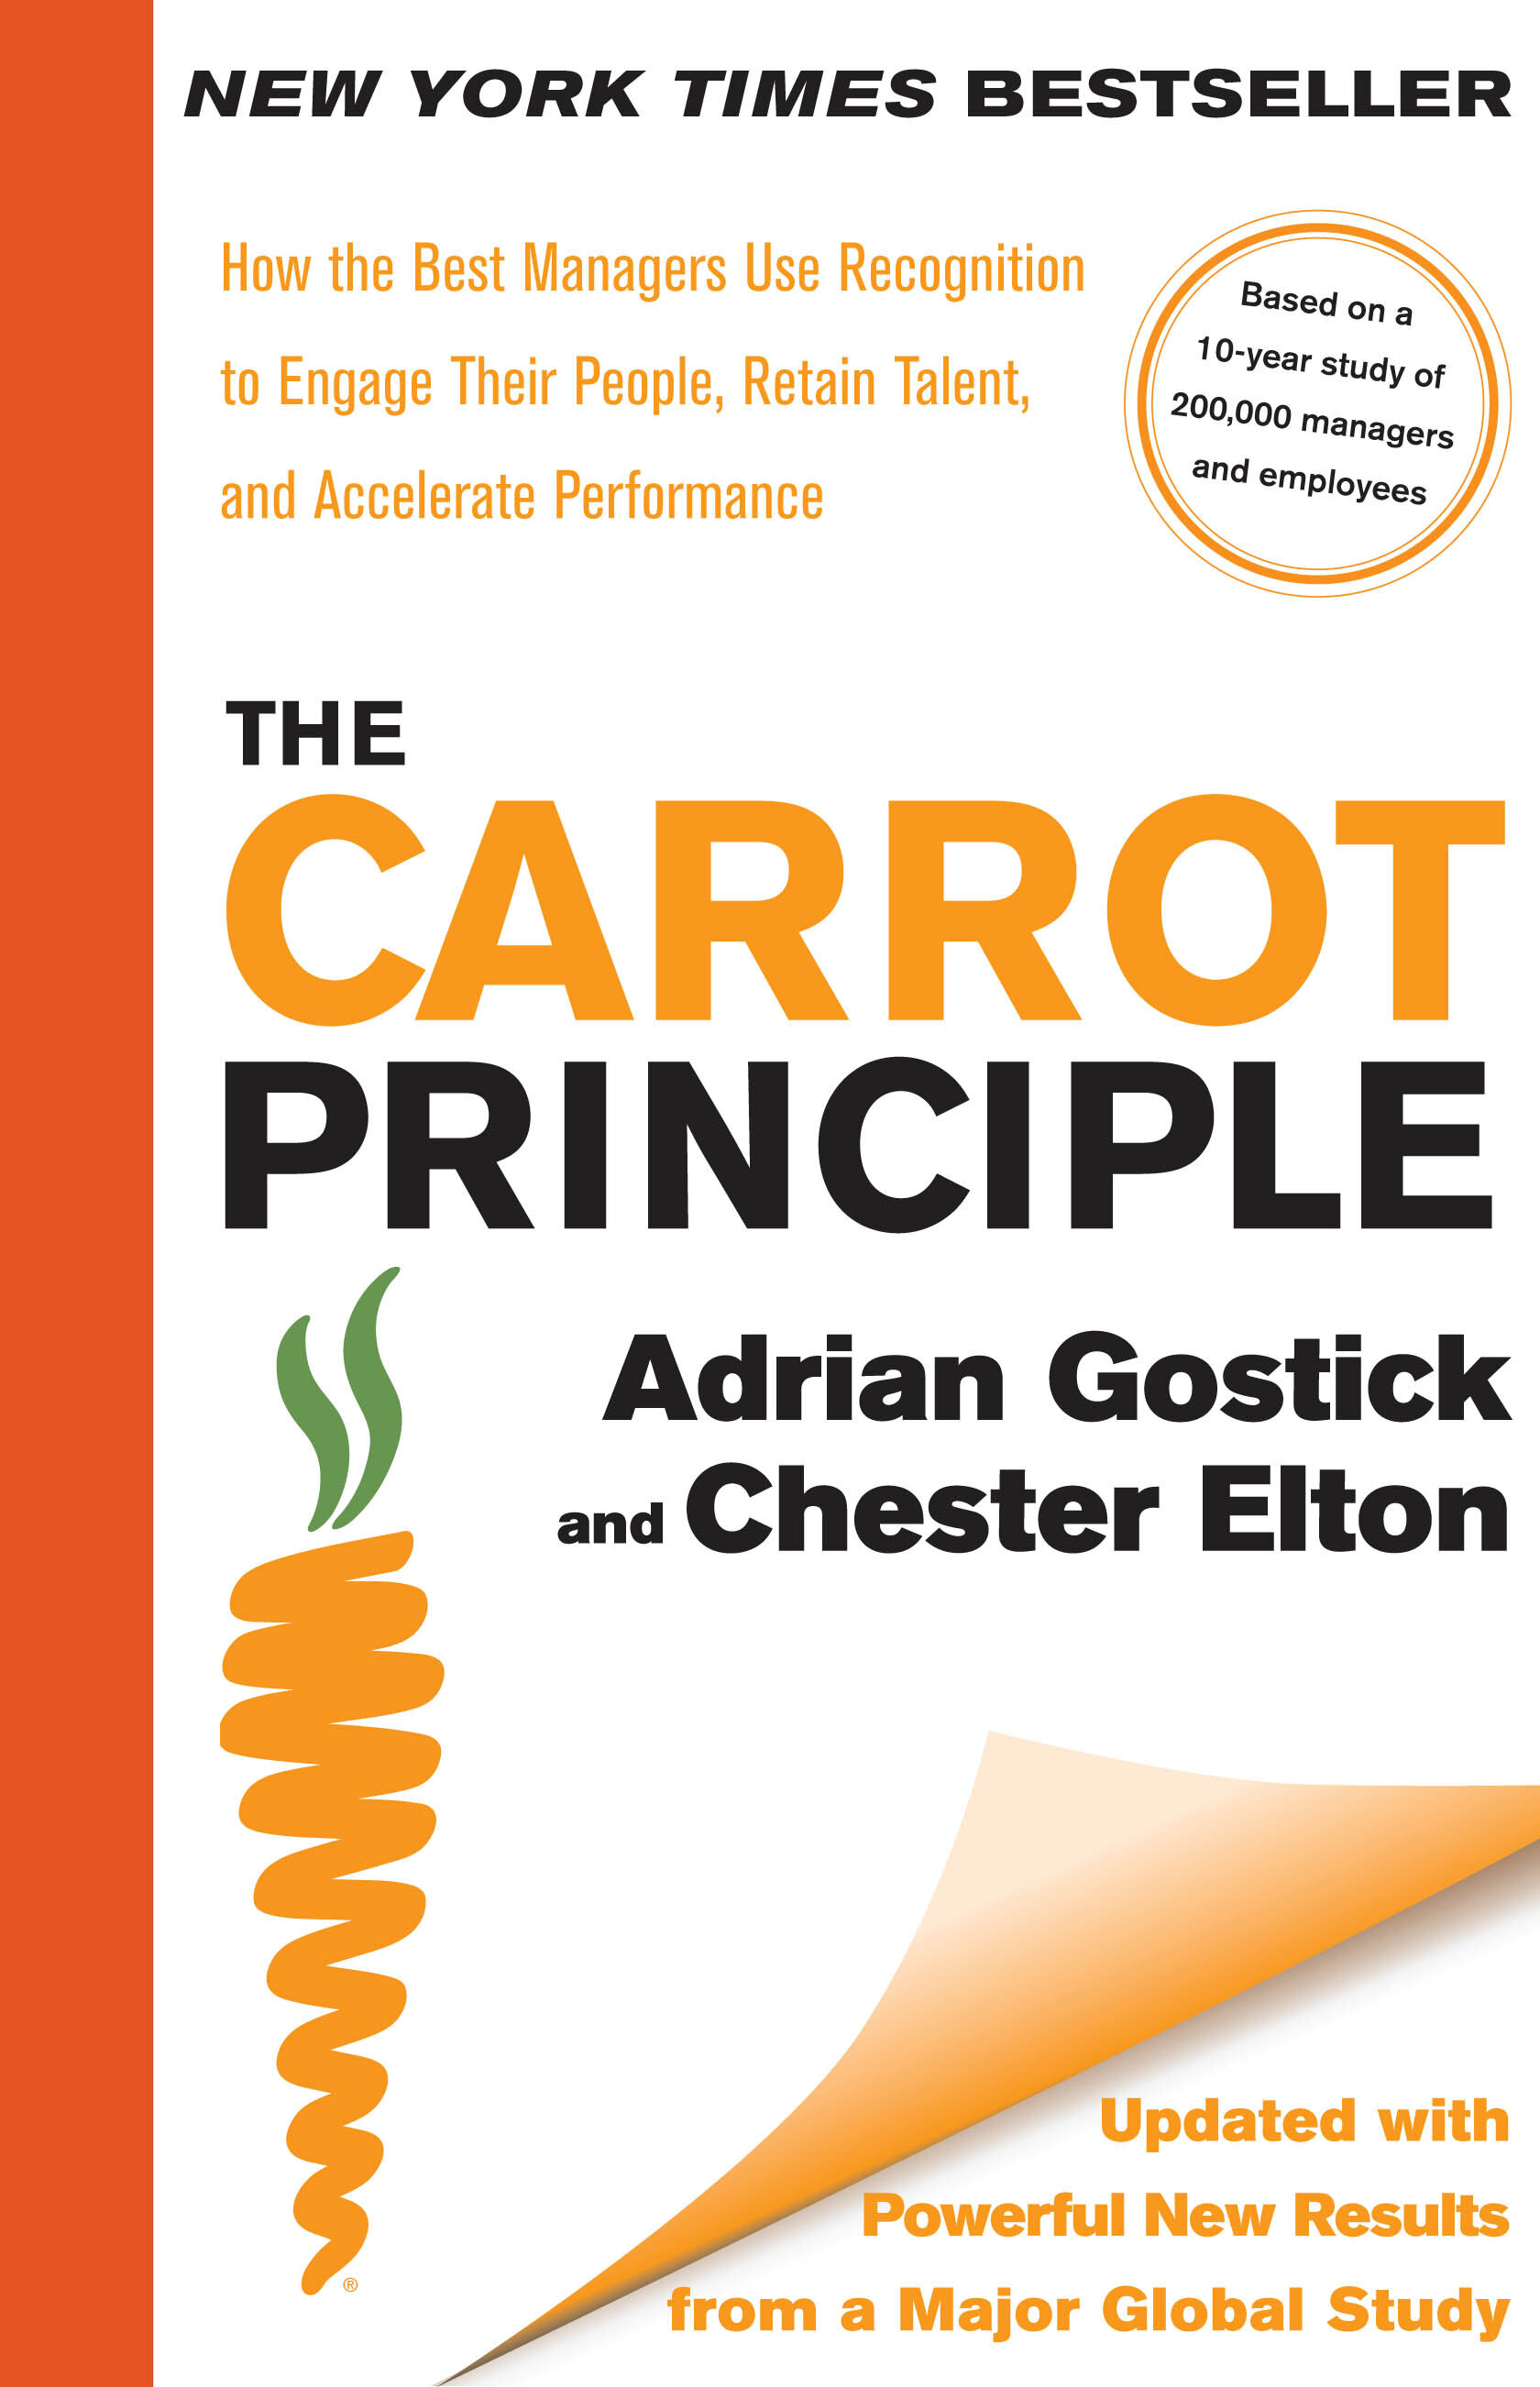 The Carrot Principle: How the Best Managers Use Recognition to Engage Their People, Retain Talent, and Accelerate Performance - Adrian Gostick and Chester Elton